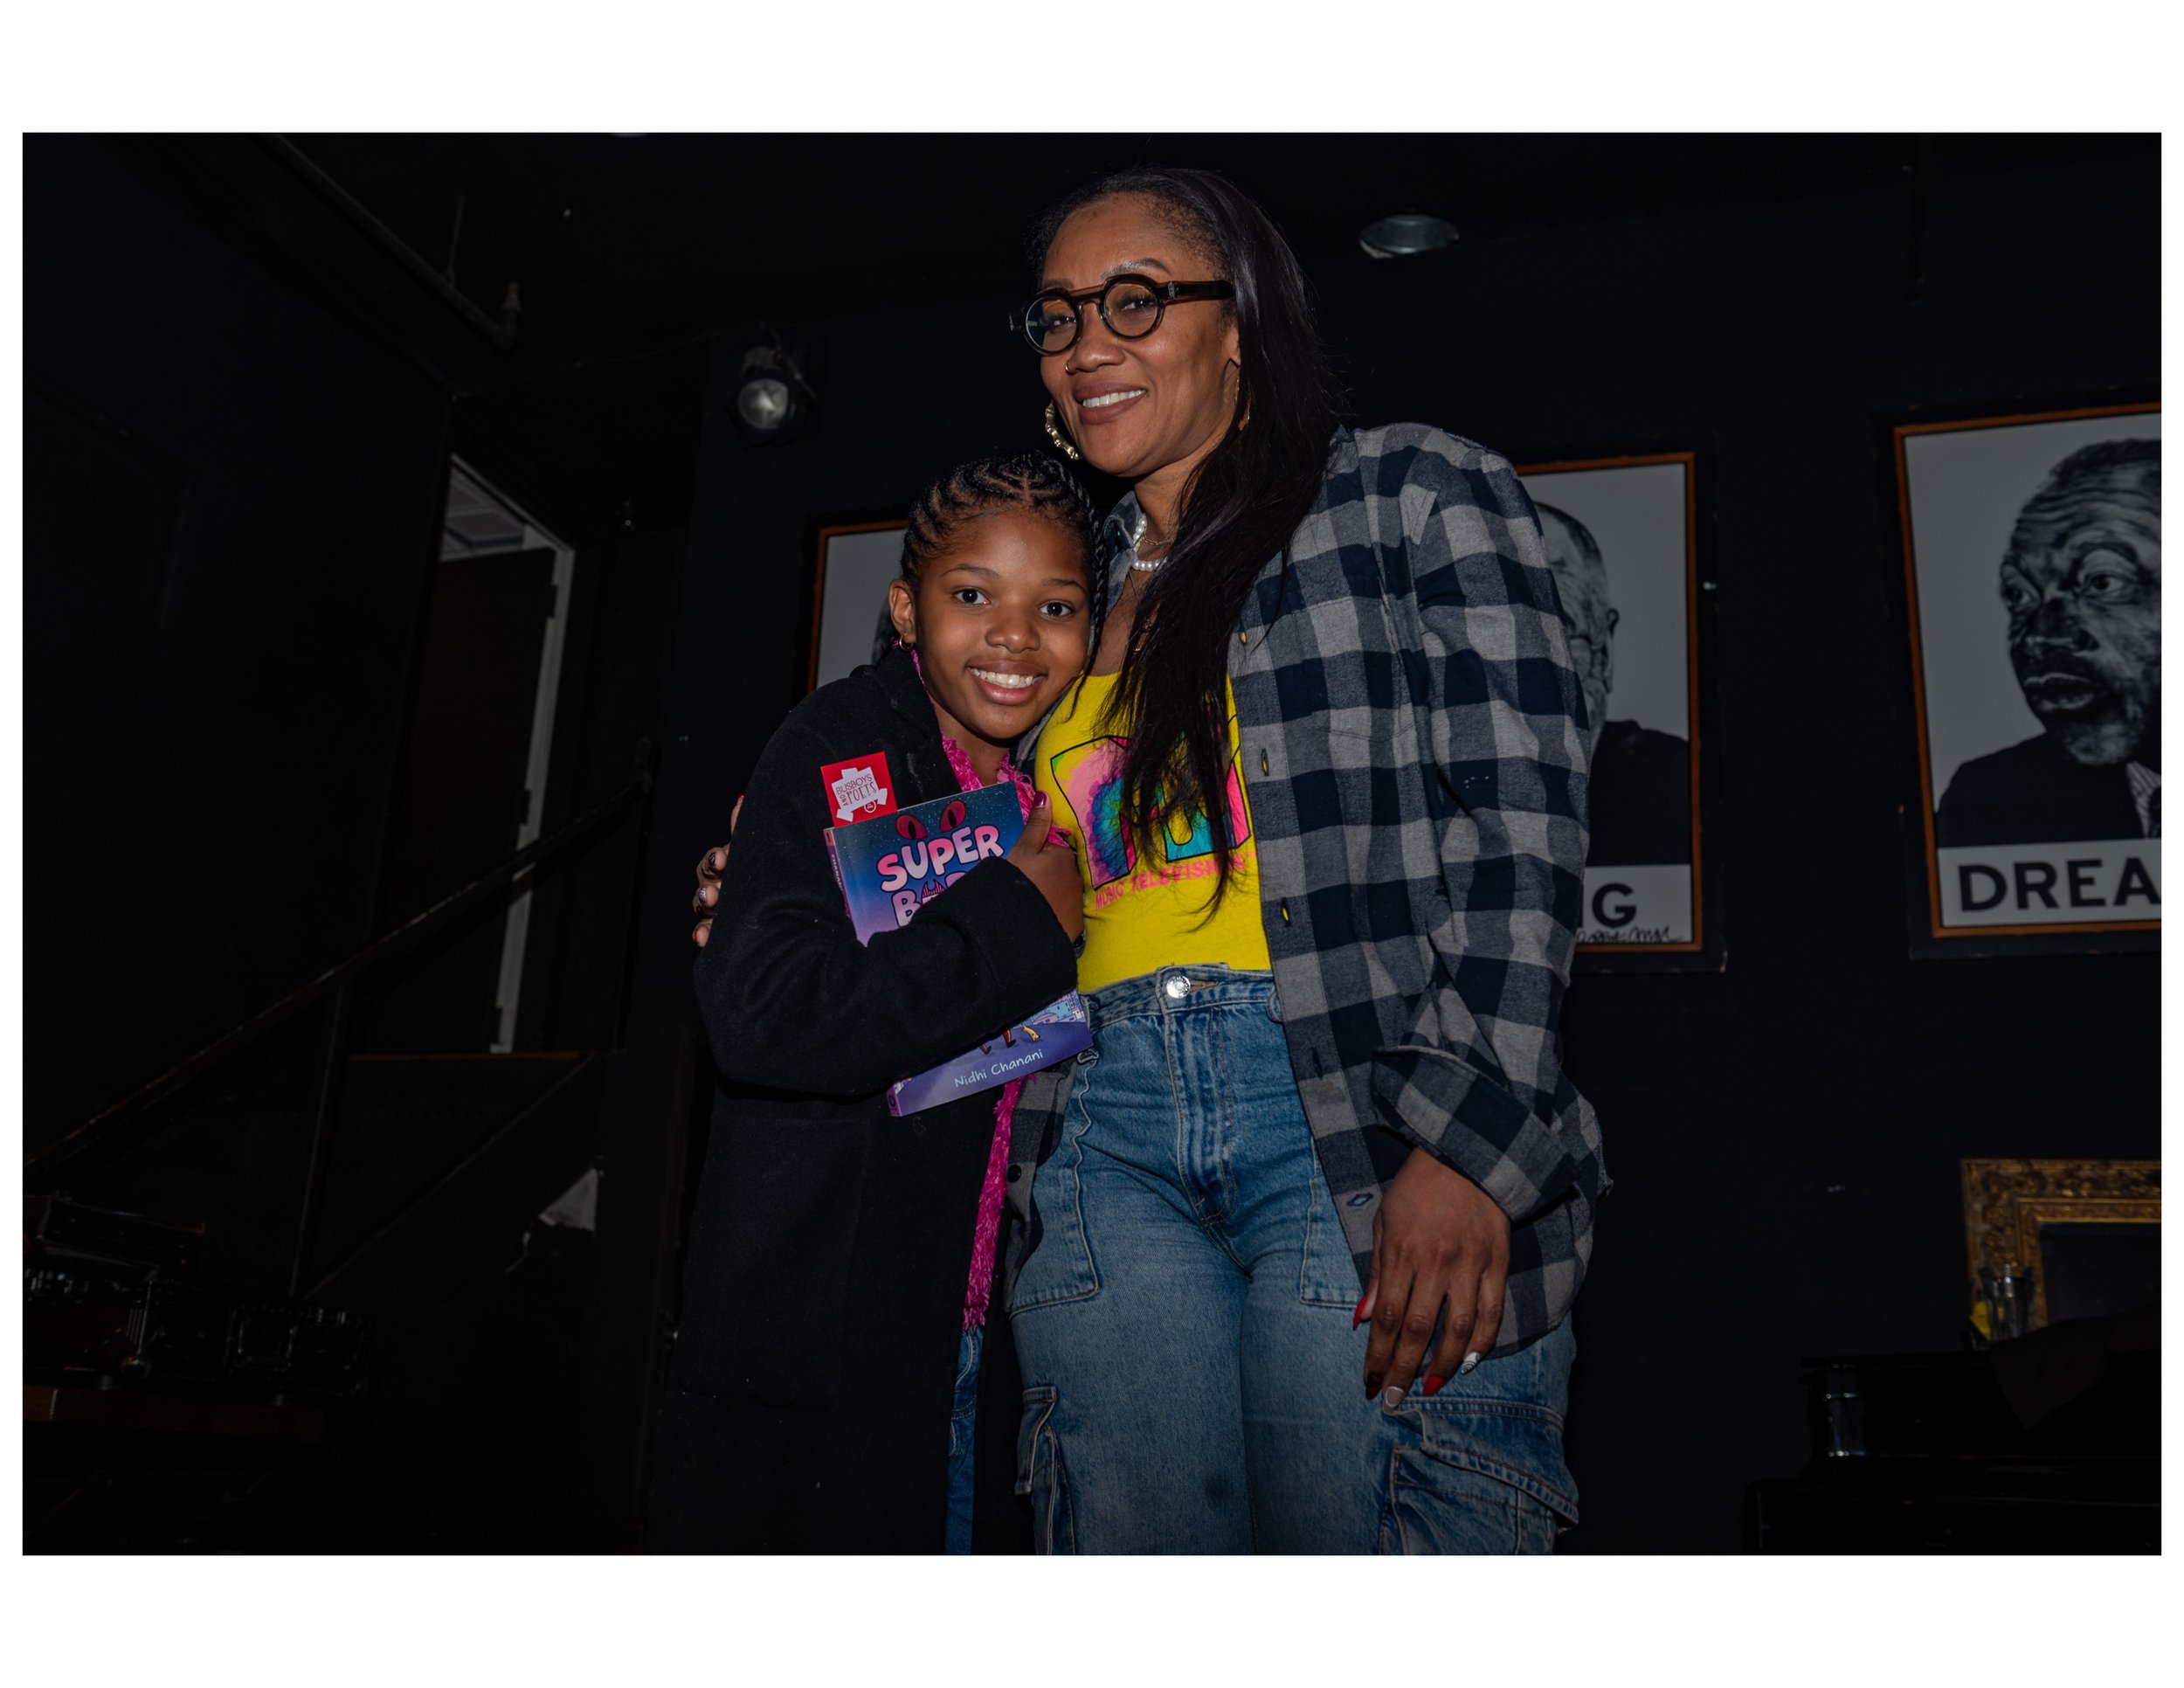   Parent and participant pose for a photo at an open mic event hosted by Words Beats &amp; Life Inc. at Busboys and Poets in Washington, DC. Photographer/Victoria Ford  